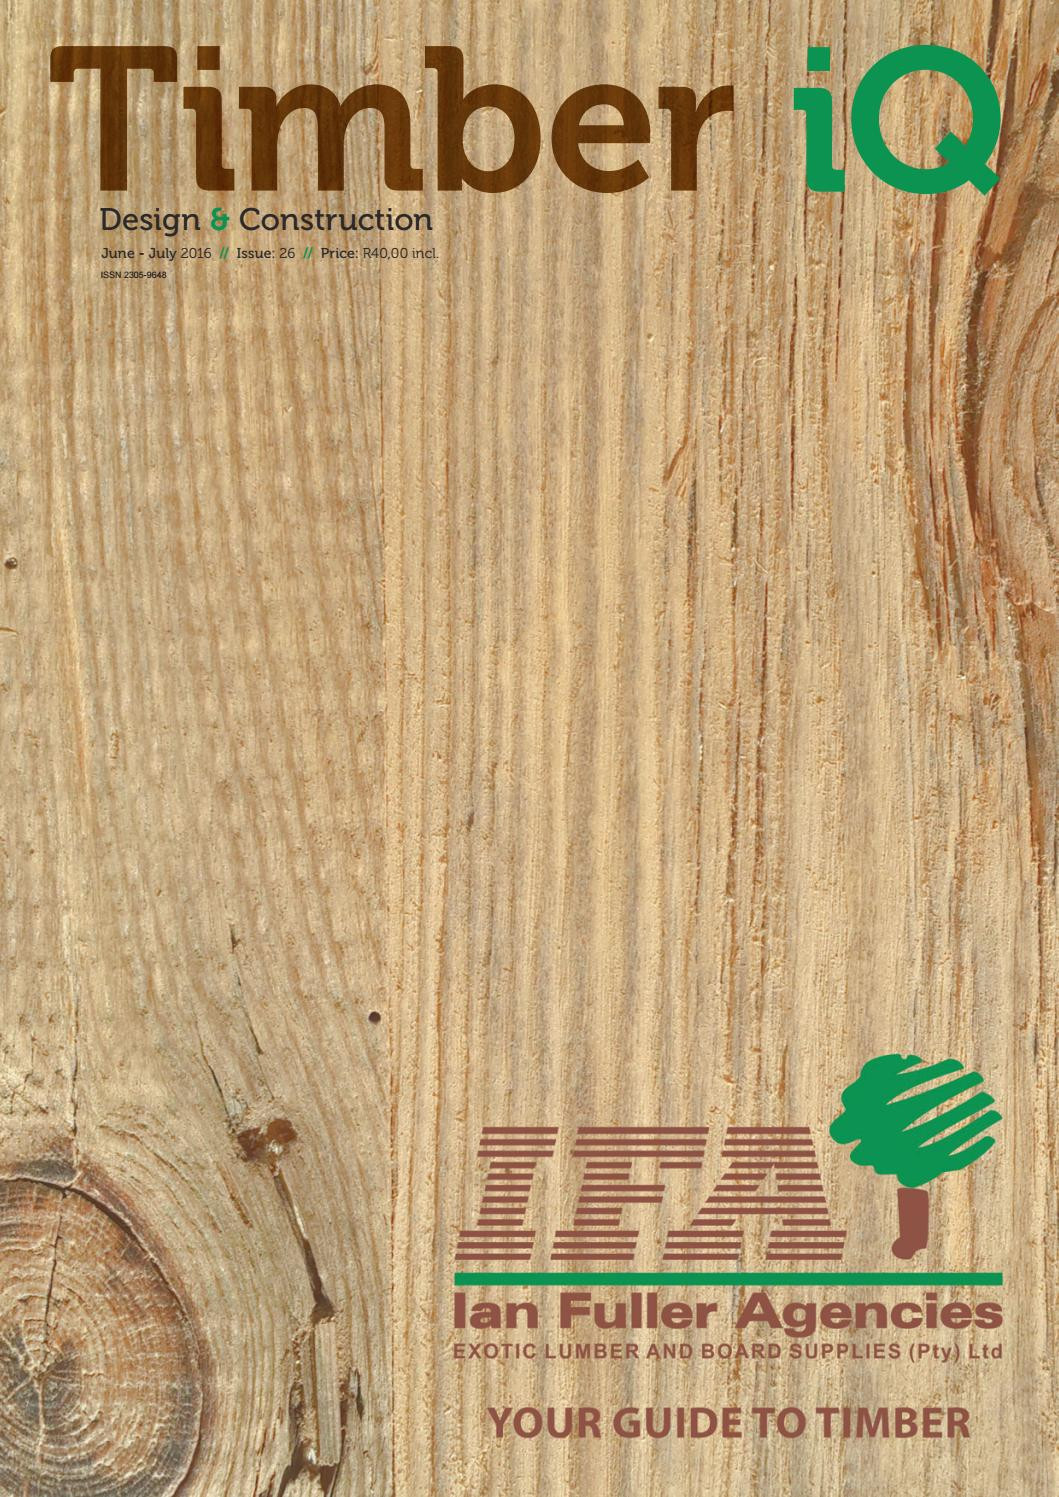 10 Nice Hardwood Floor Refinishing Cincinnati 2024 free download hardwood floor refinishing cincinnati of timber iq june july 2016 issue 26 by trademax publications issuu with page 1